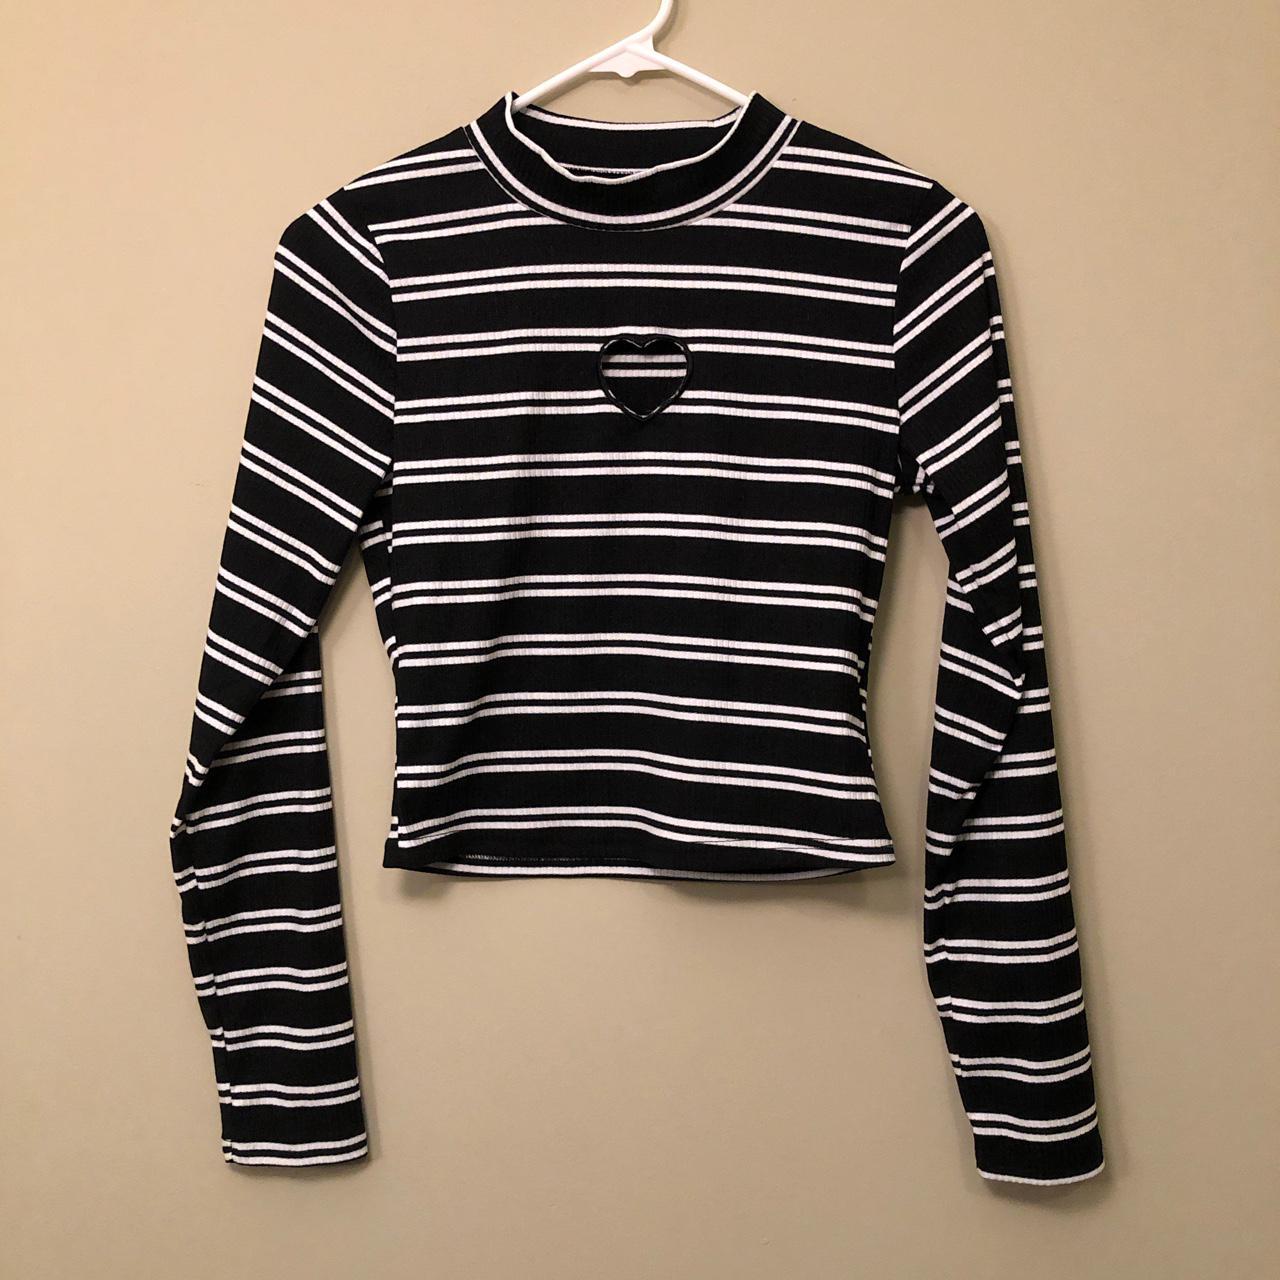 Product Image 1 - Black and White Striped Long